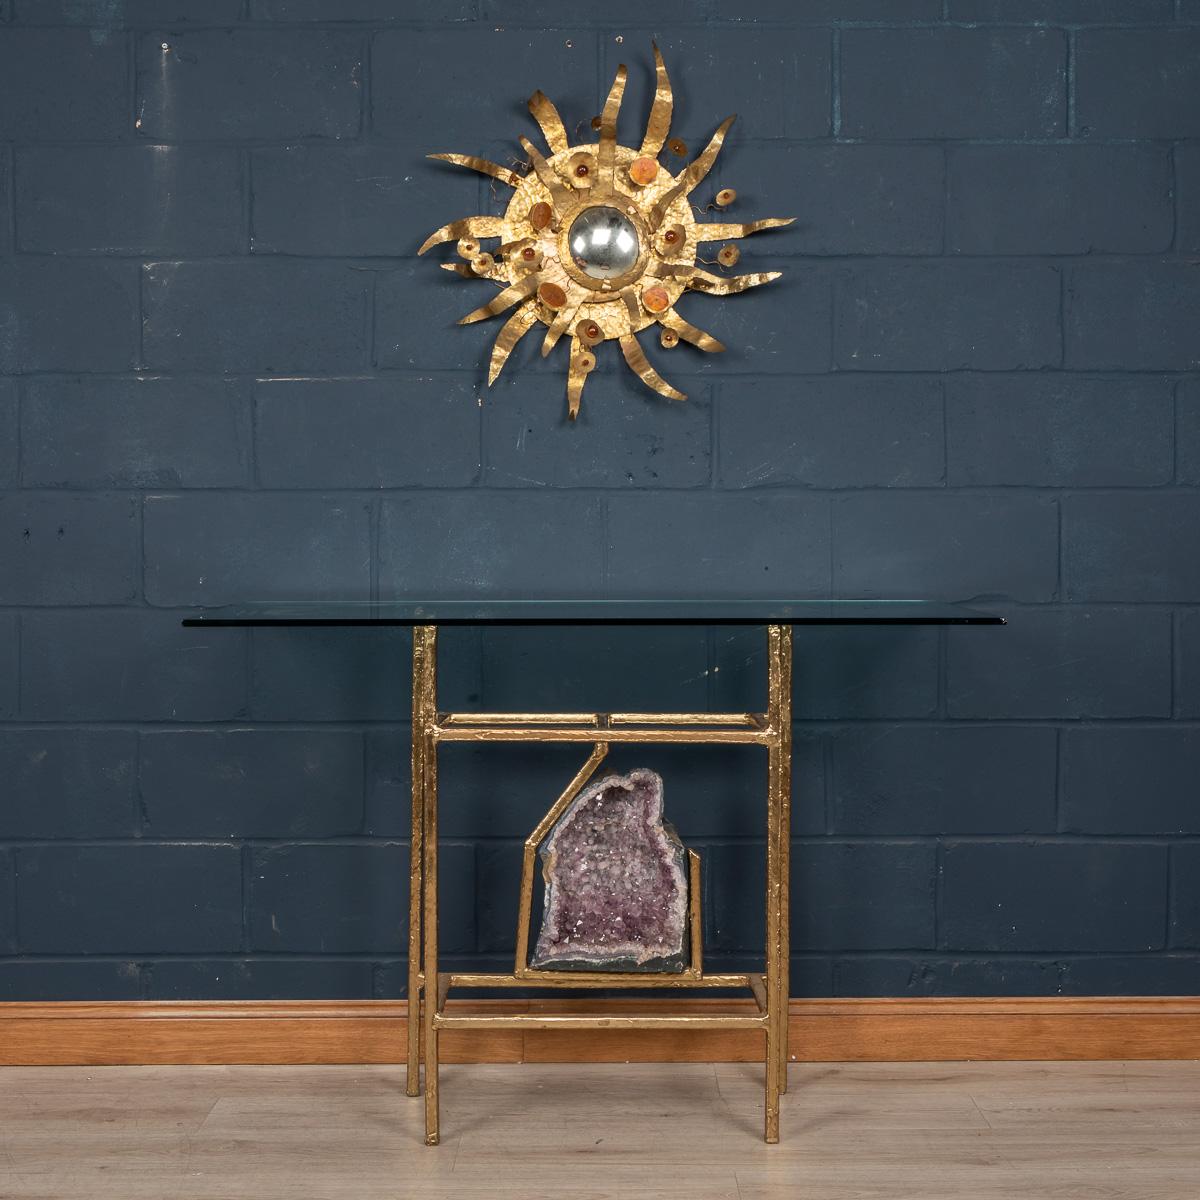 A spectacular console table designed and manufactured by Henri Fernandez in the 1970s, this item is largely made from brass encasing an amethyst geode. Amethysts are reported to open a person's third eye, considered to be a source of power and